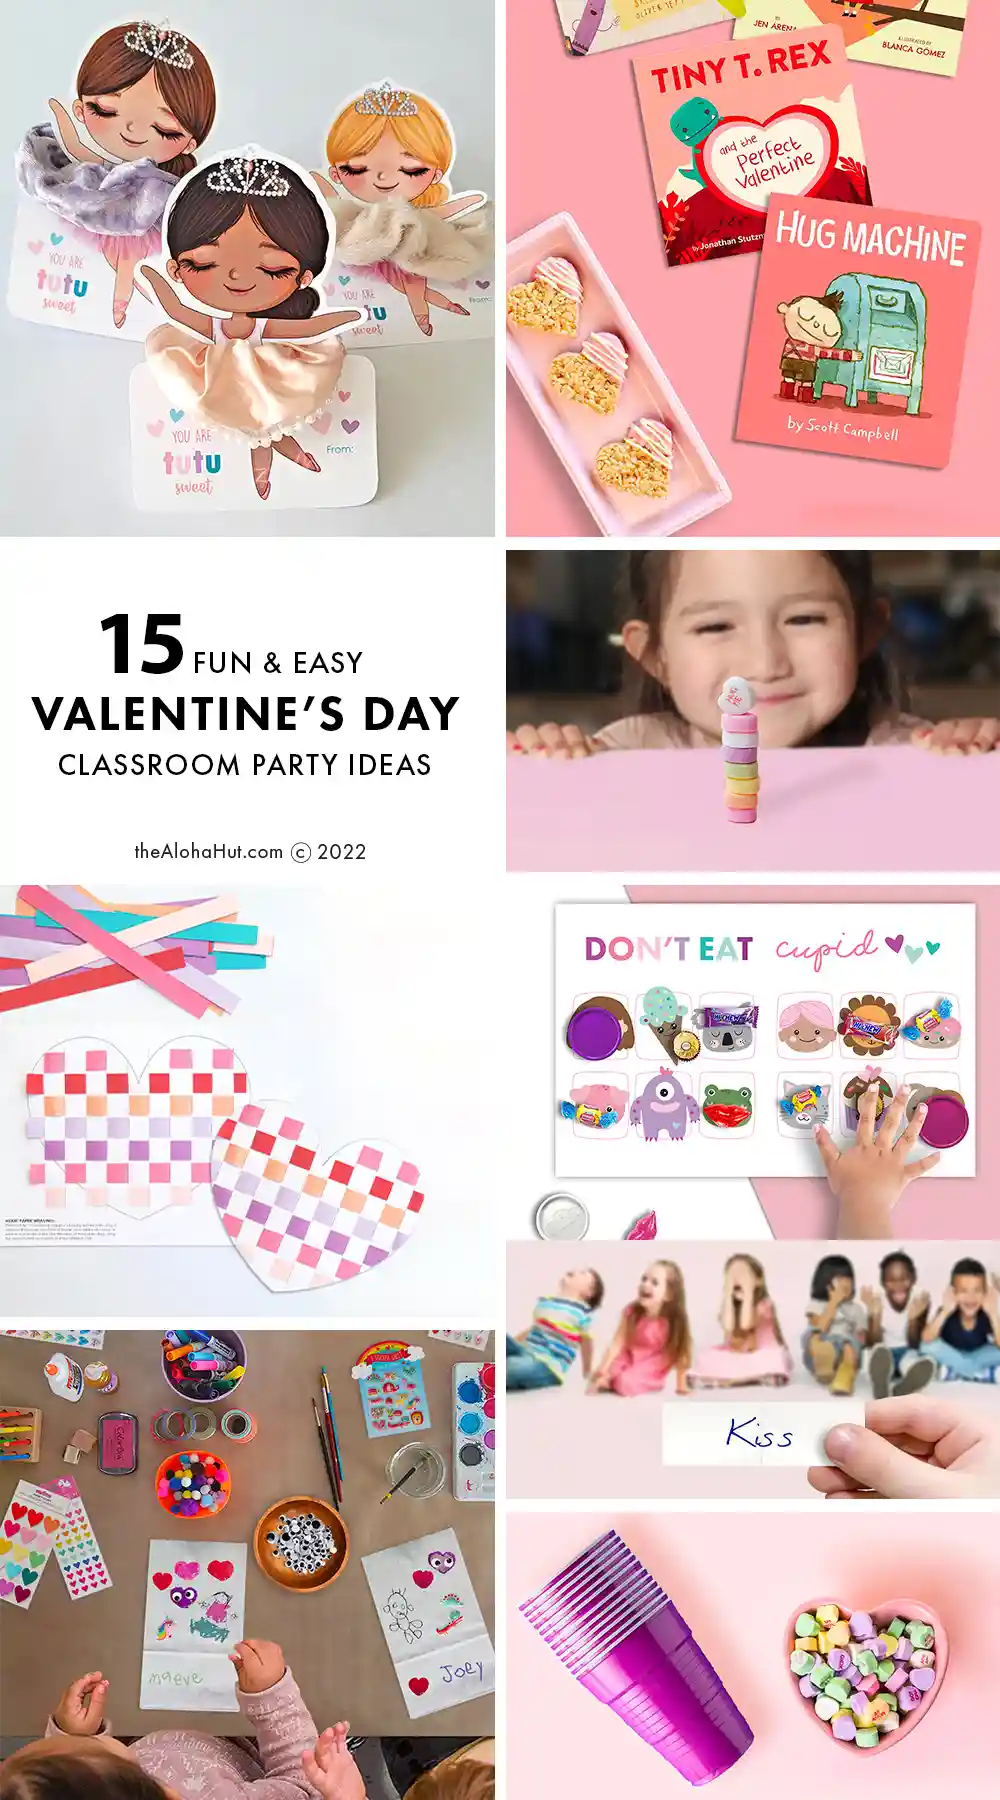 Fun & Easy Valentine's Day Classroom Party Ideas